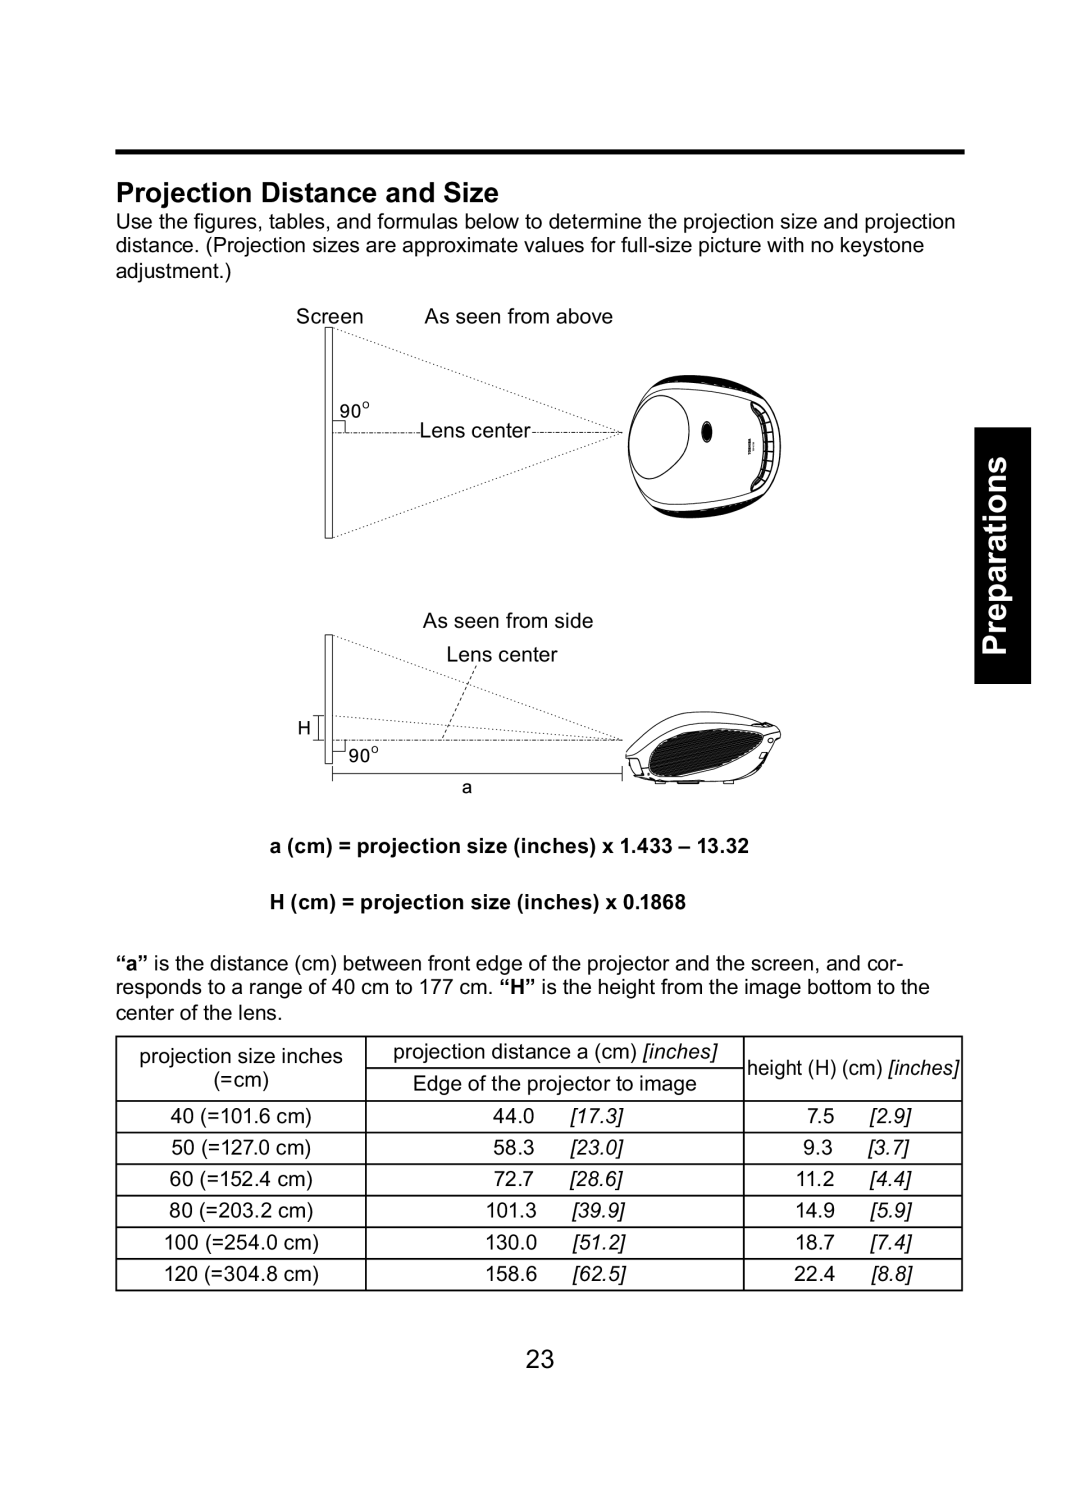 Toshiba TDP-ET10 Projection Distance and Size, a cm = projection size inches x 1.433 H cm = projection size inches x, 17.3 